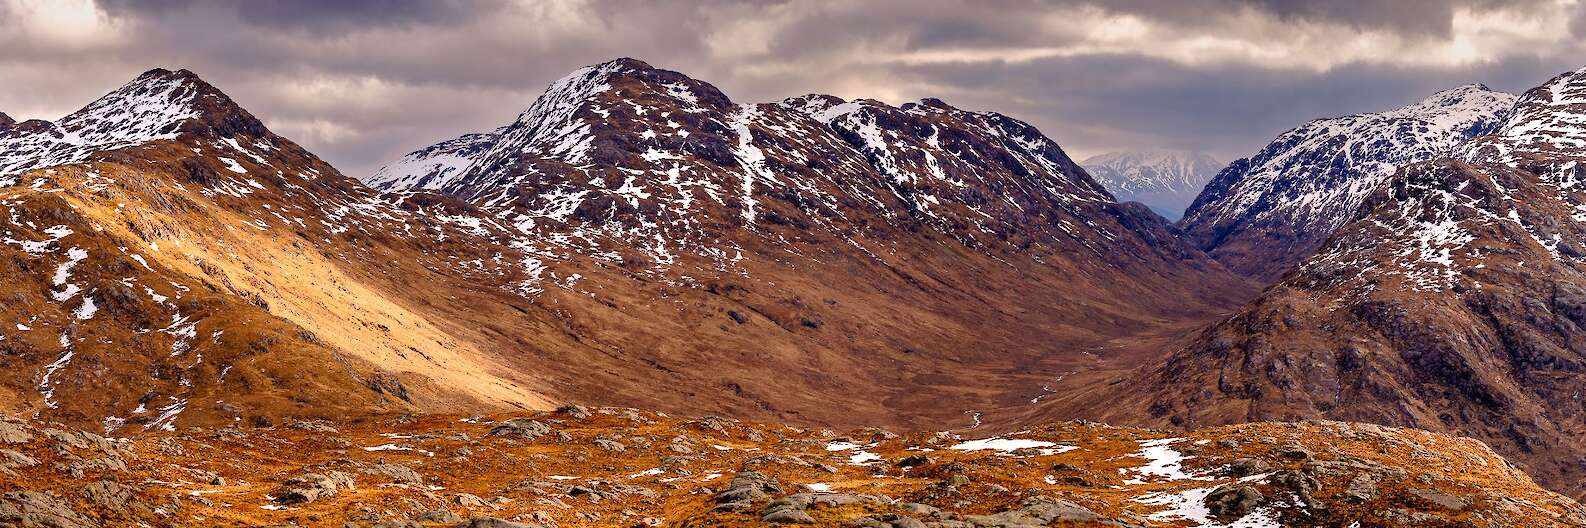 Glen Gour and Sgurr Dhomhnuill | Courtesy of Steven Marshall Photography - www.smarshall-photography.com